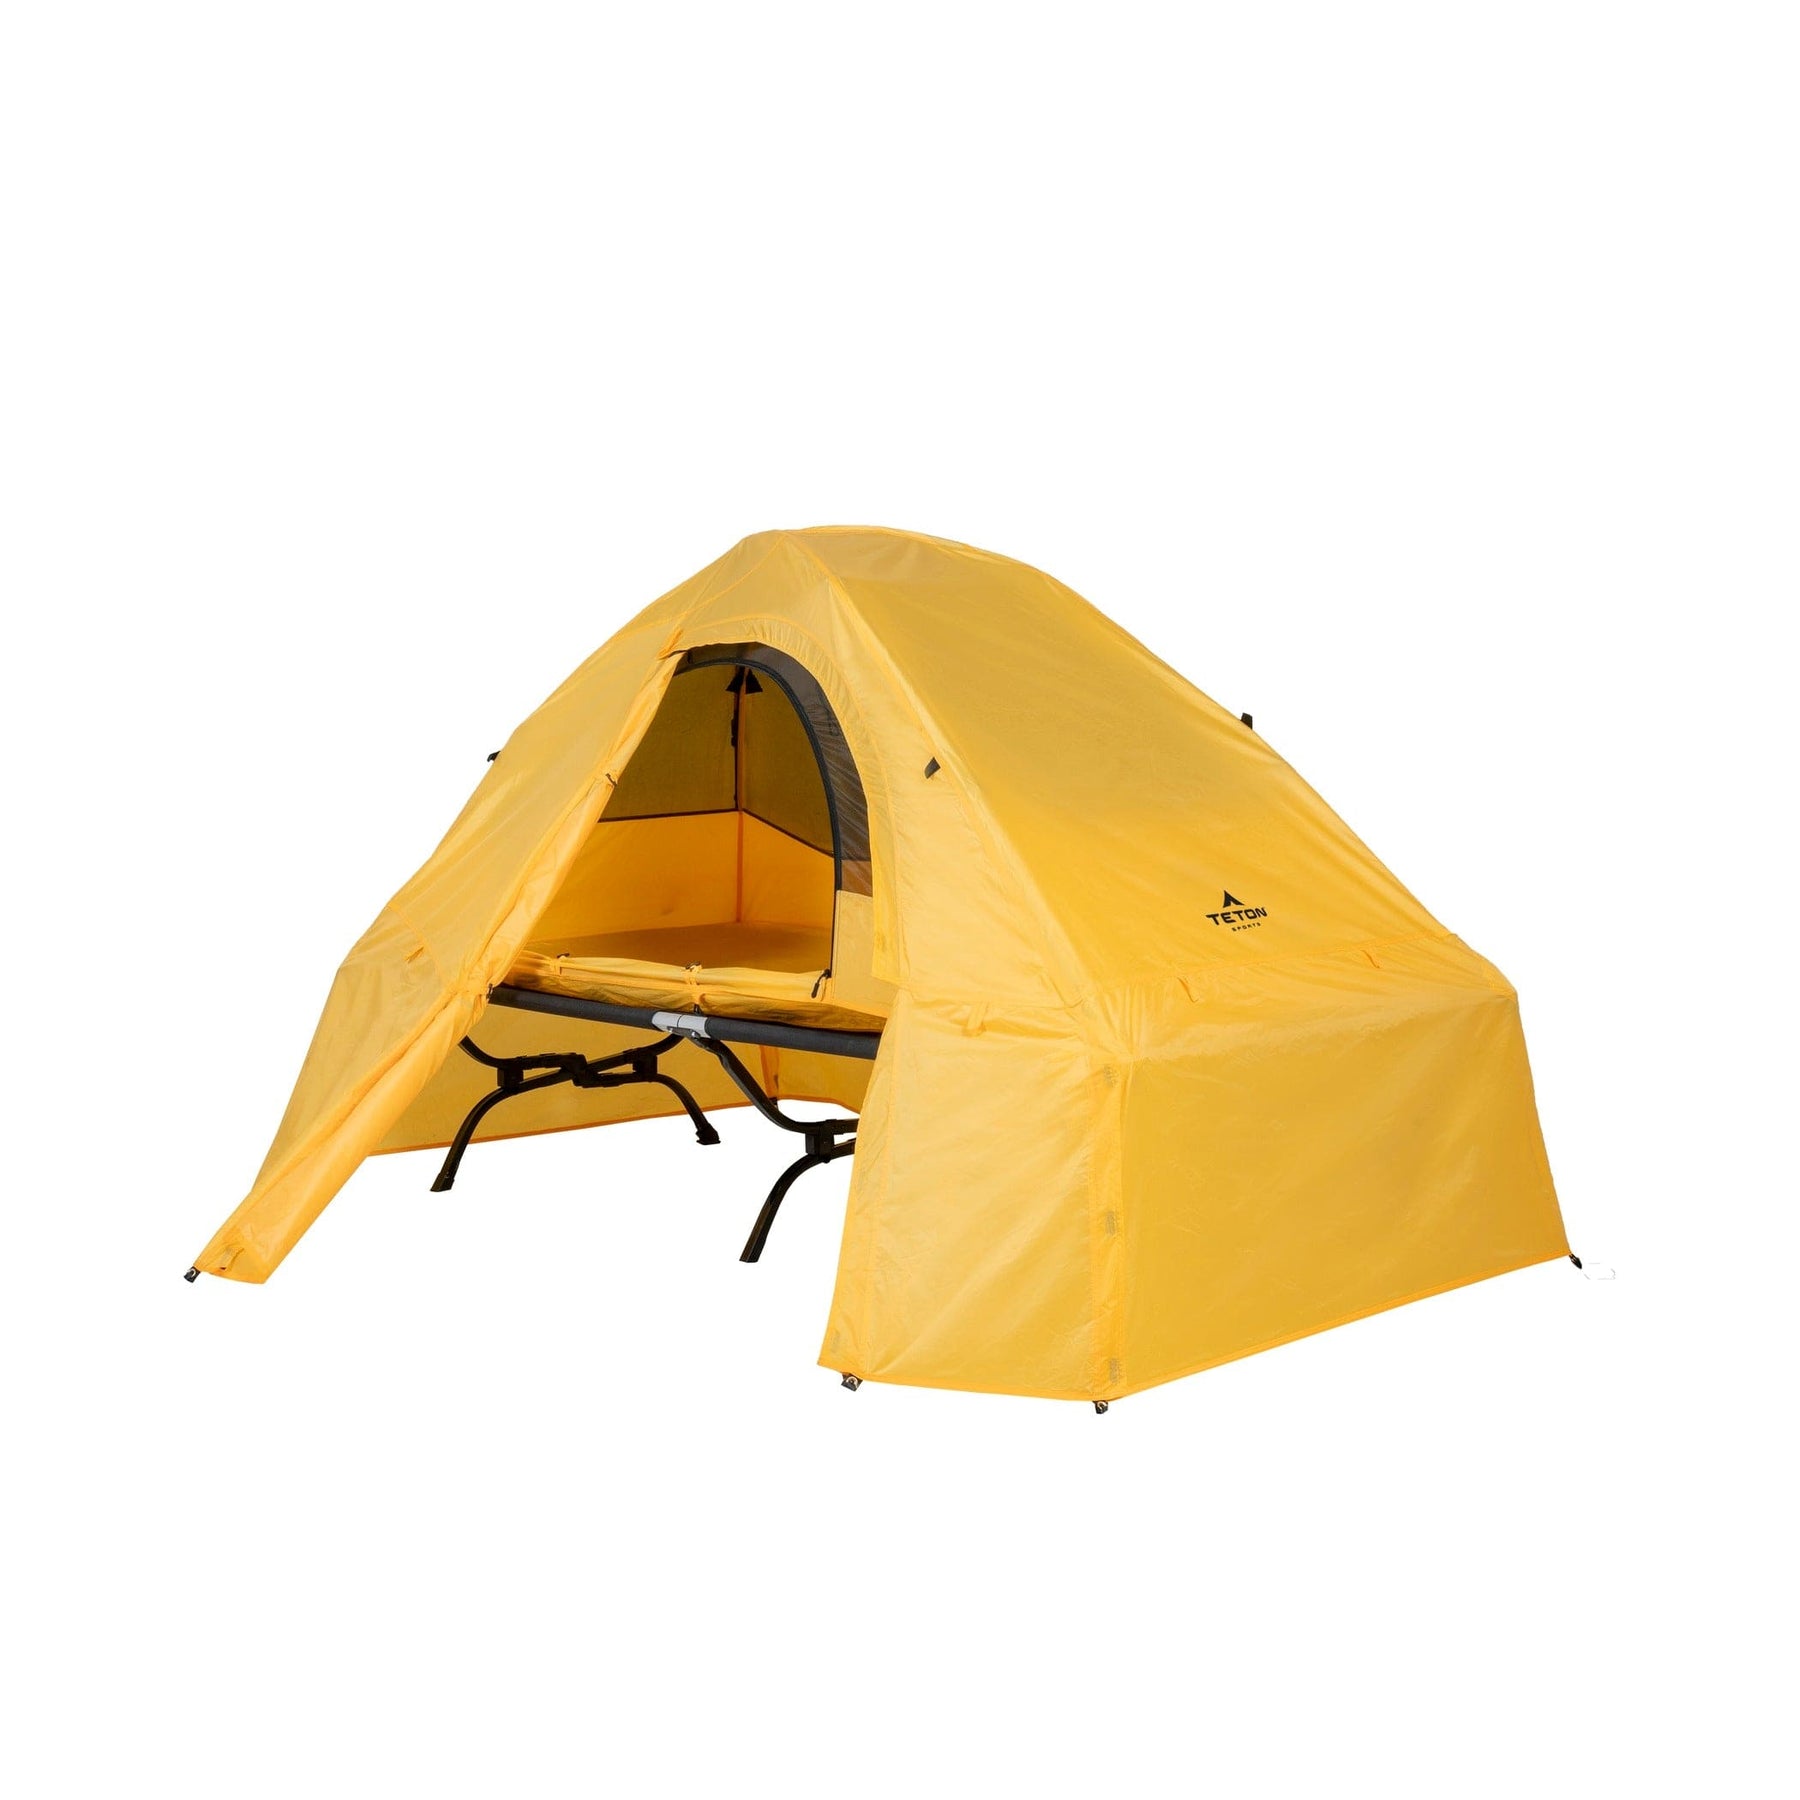 TETON Sports Vista 1 Elite Extended Length Rainfly Tent & Cot Cover Yellow 2002YL